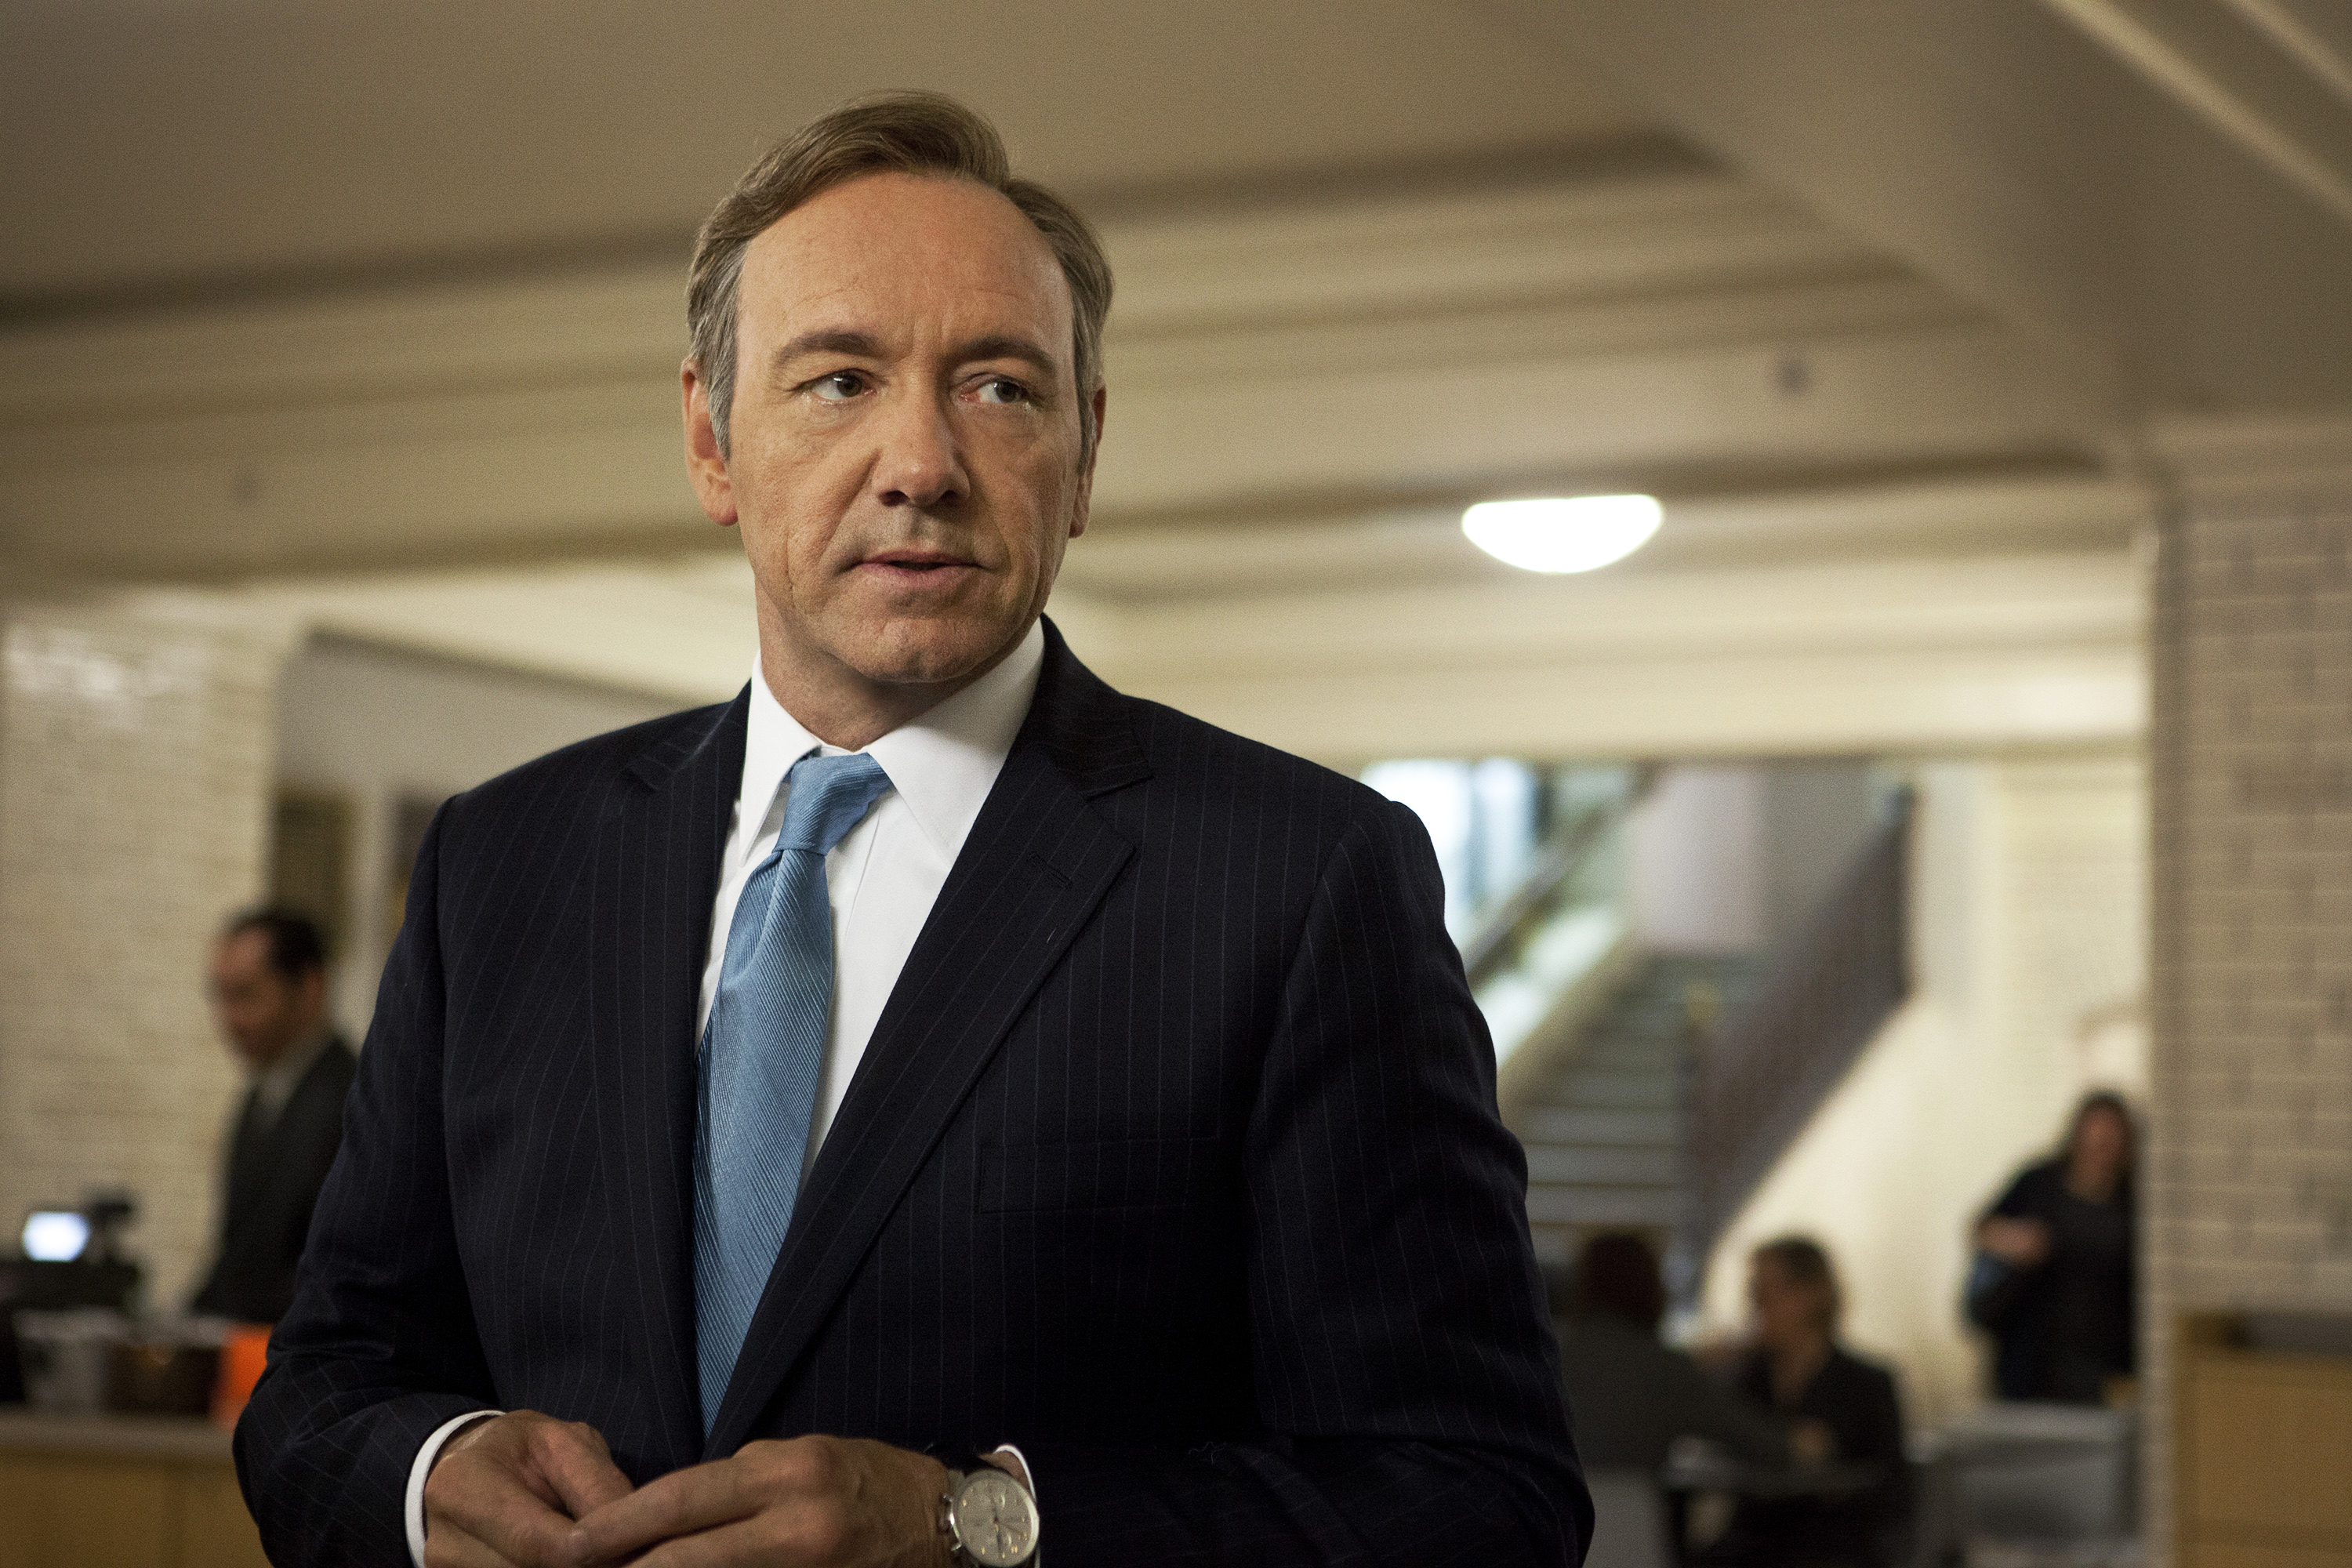 Kevin Spacey as U.S. Congressman Frank Underwood in a scene from the first season of the Netflix original series, "House of Cards." (Melinda Sue Gordon—AP)